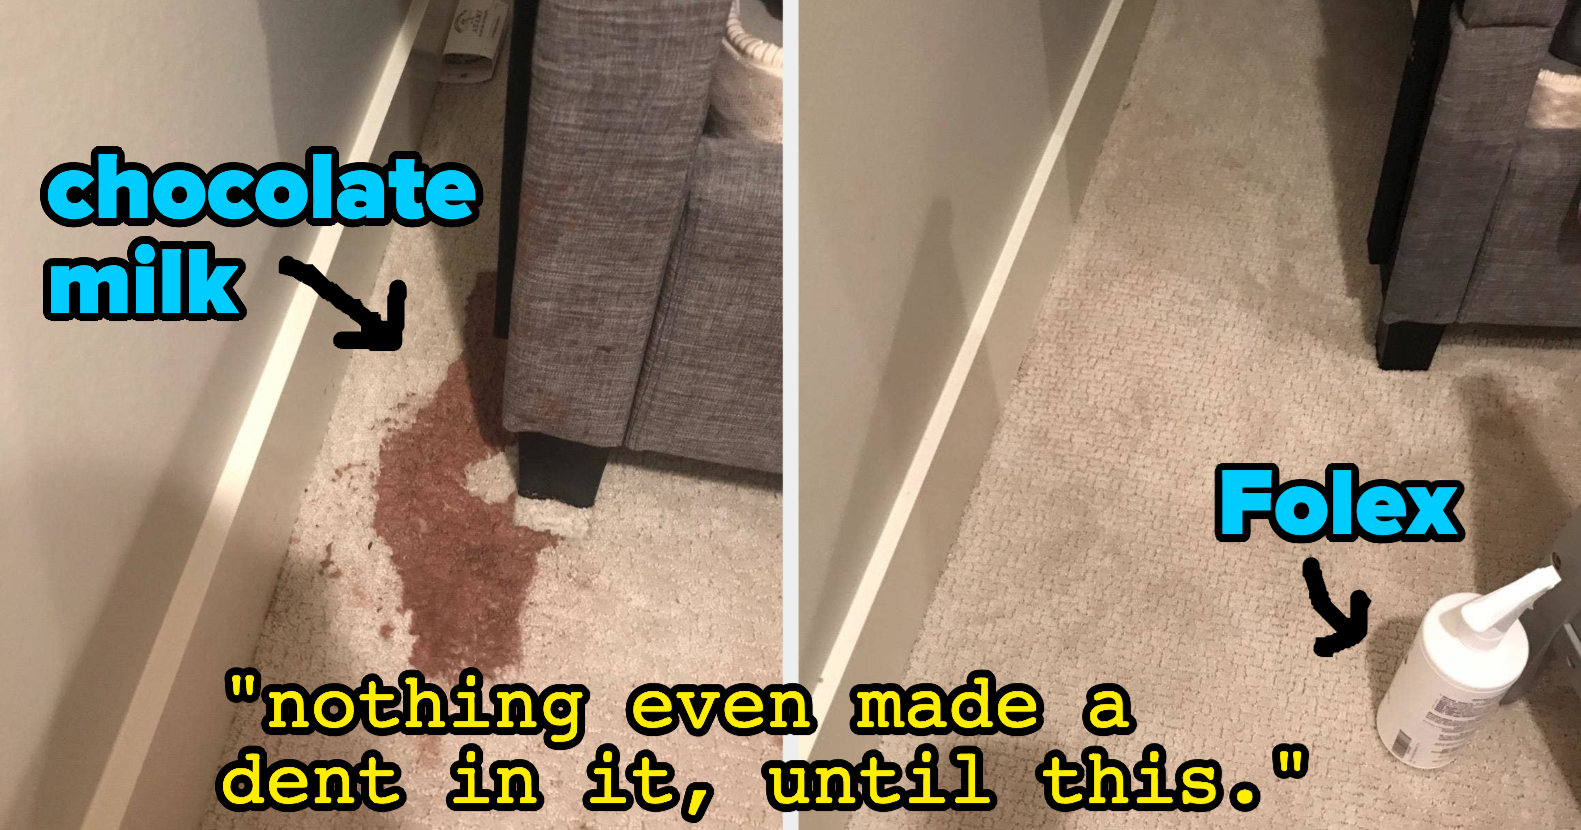 How do I get wood dye out of carpet? UK based : r/CleaningTips